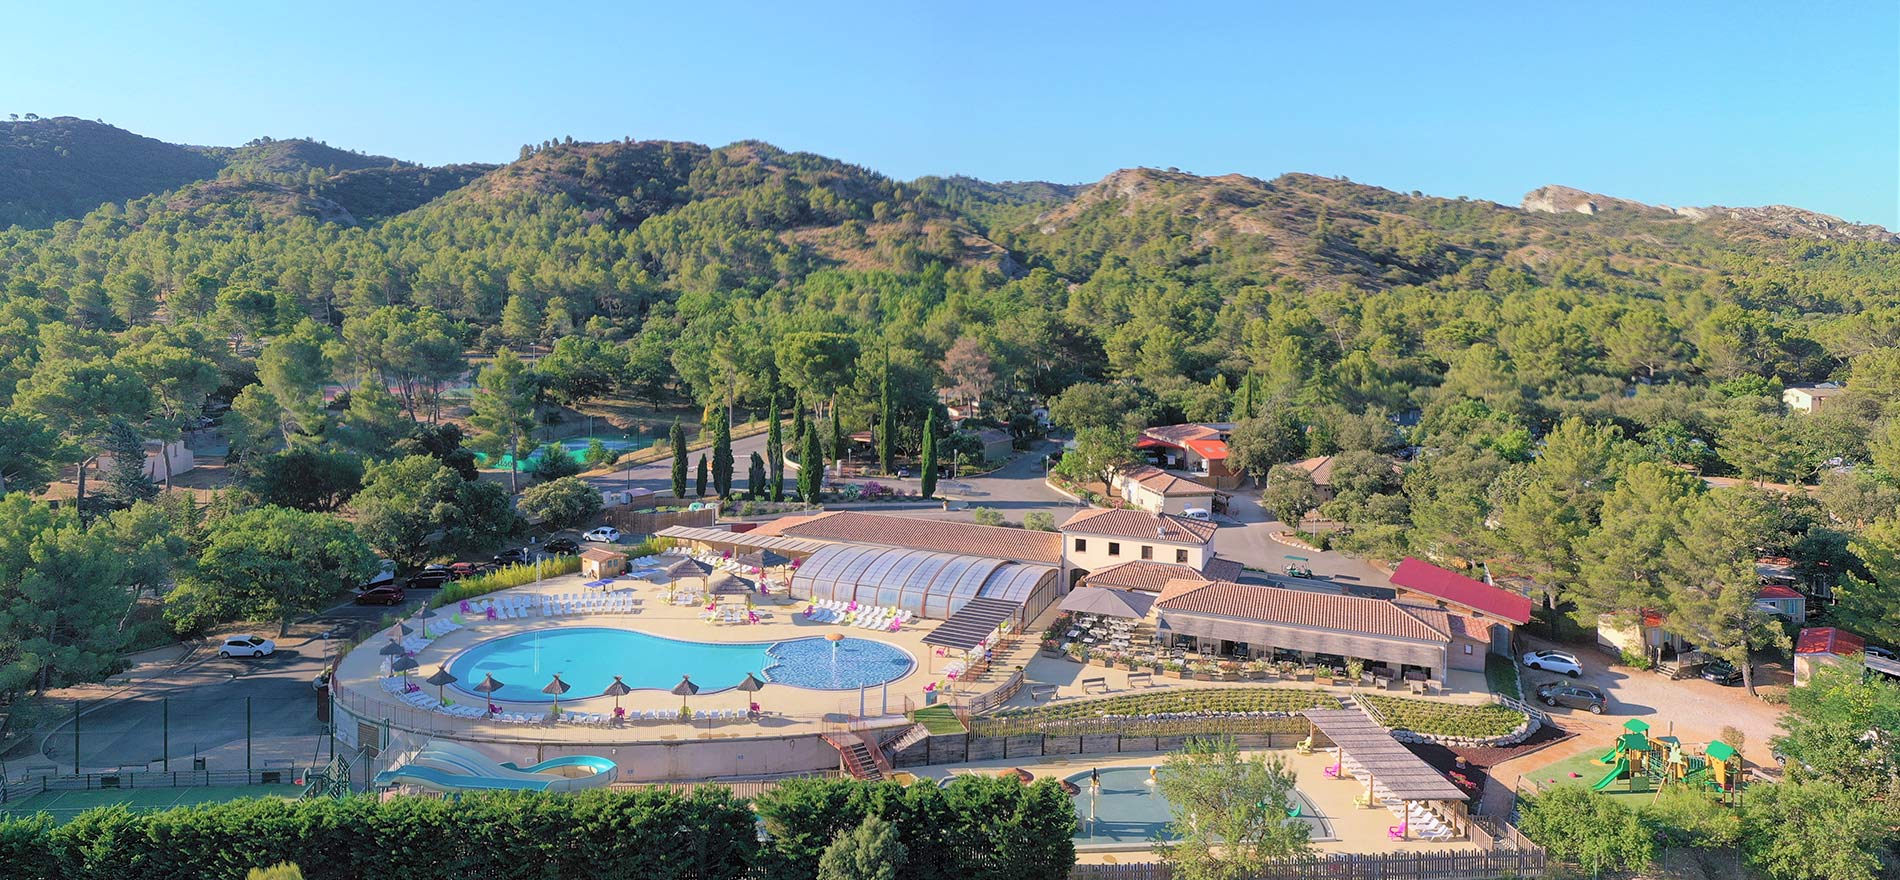 Luberon Parc Camping Reviews Your Opinion Is Important